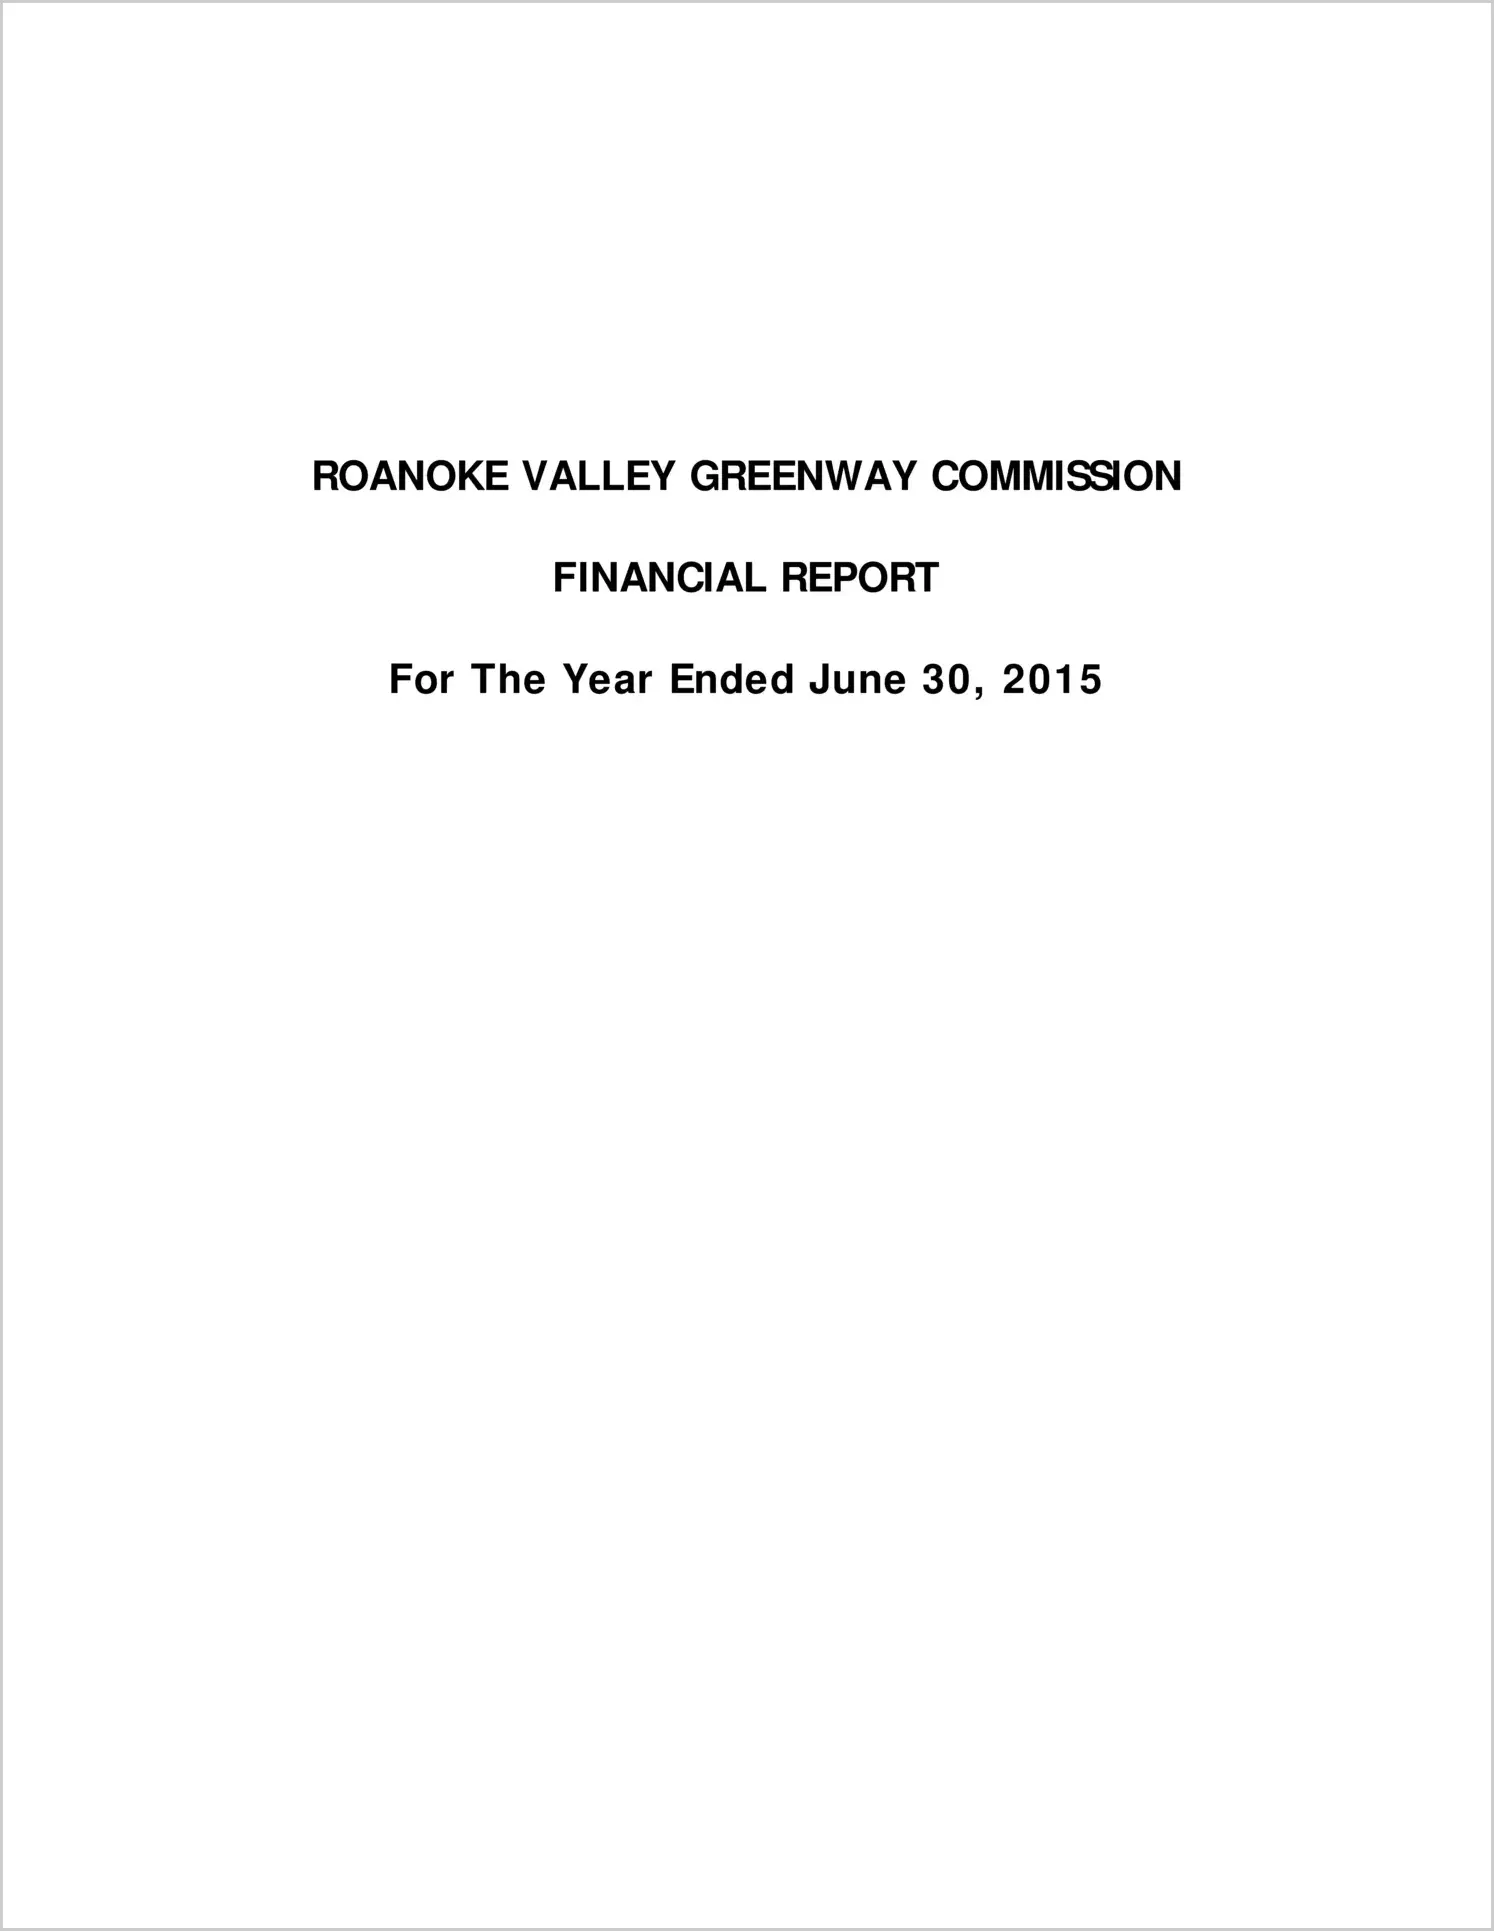 2015 ABC/Other Annual Financial Report  for Roanoke Valley Greenway Commission